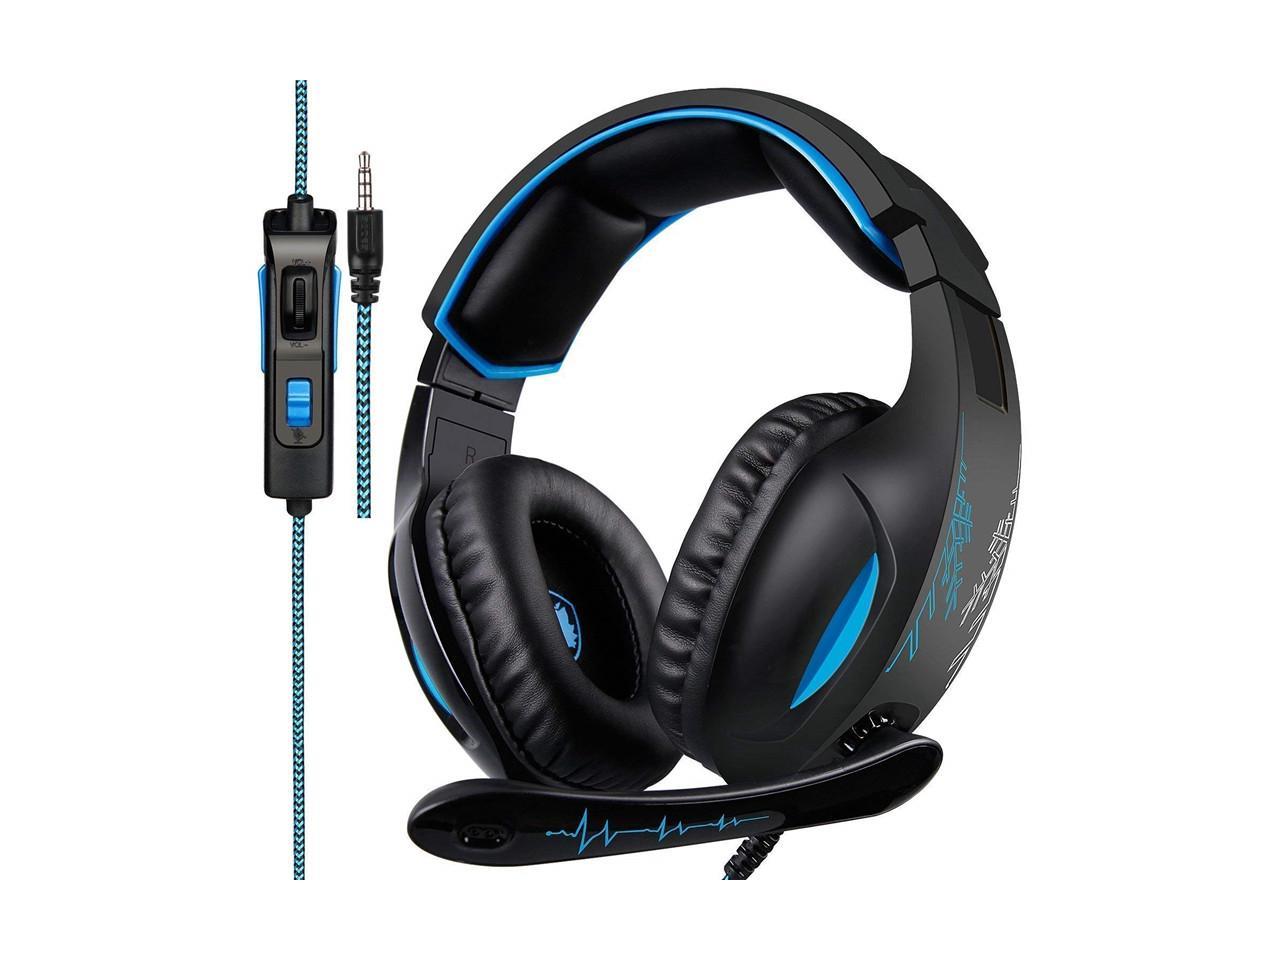 SADES SA-816 Gaming Headsets Big Headphones with Light Mic Stereo Earphones Deep Bass for PC Computer Gamer Laptop PS4 New X-BOX